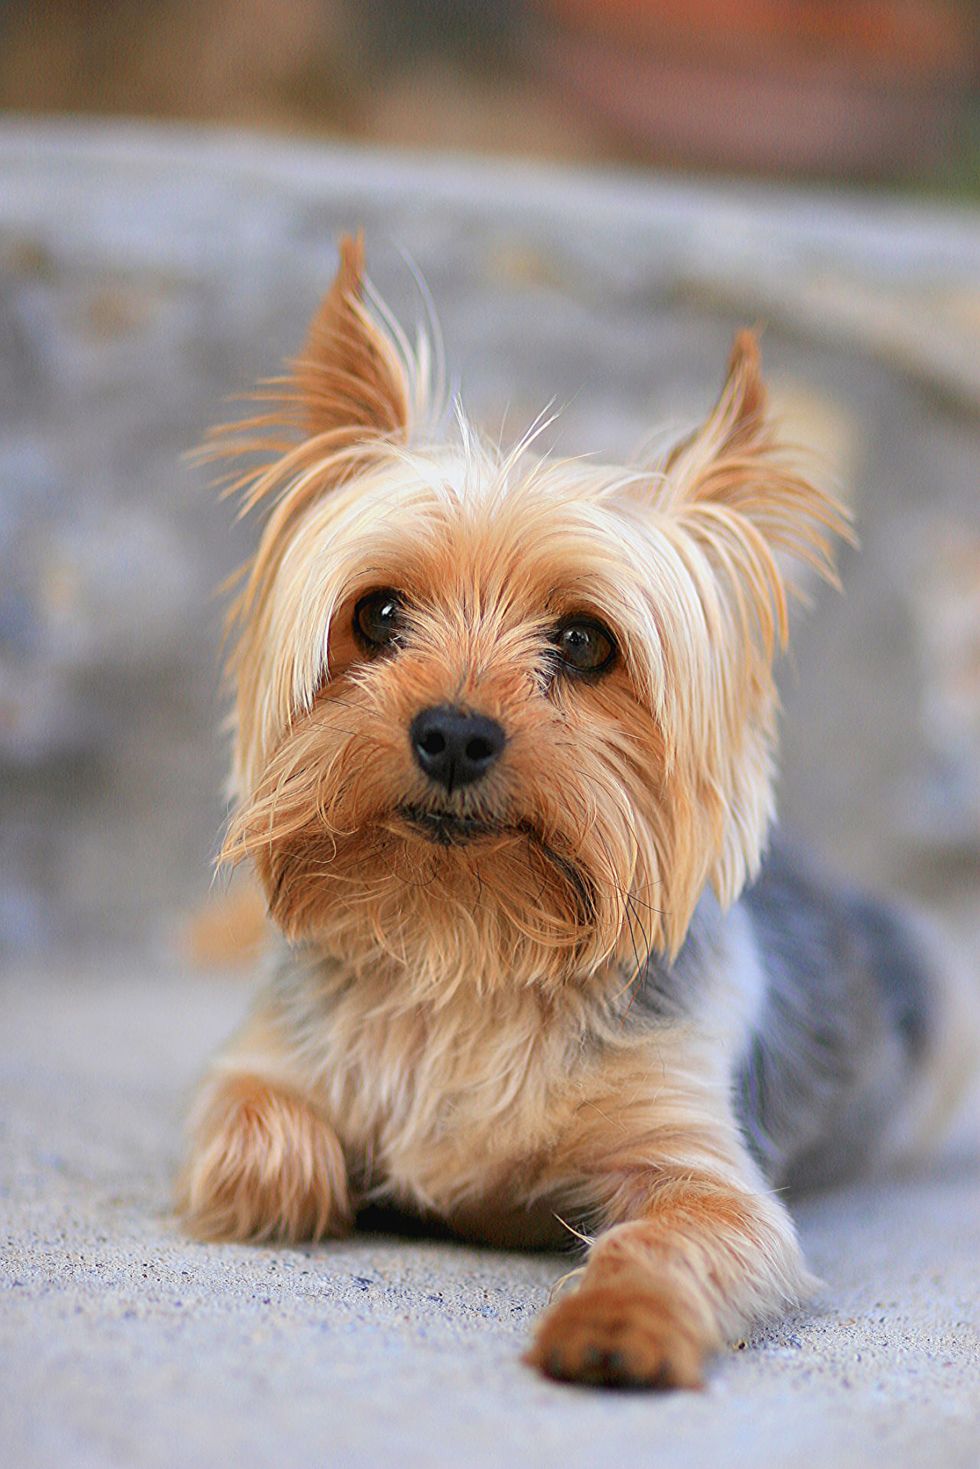 Dog breed, Dog, Carnivore, Vertebrate, Small terrier, Mammal, Terrier, Toy dog, Snout, Fawn, 